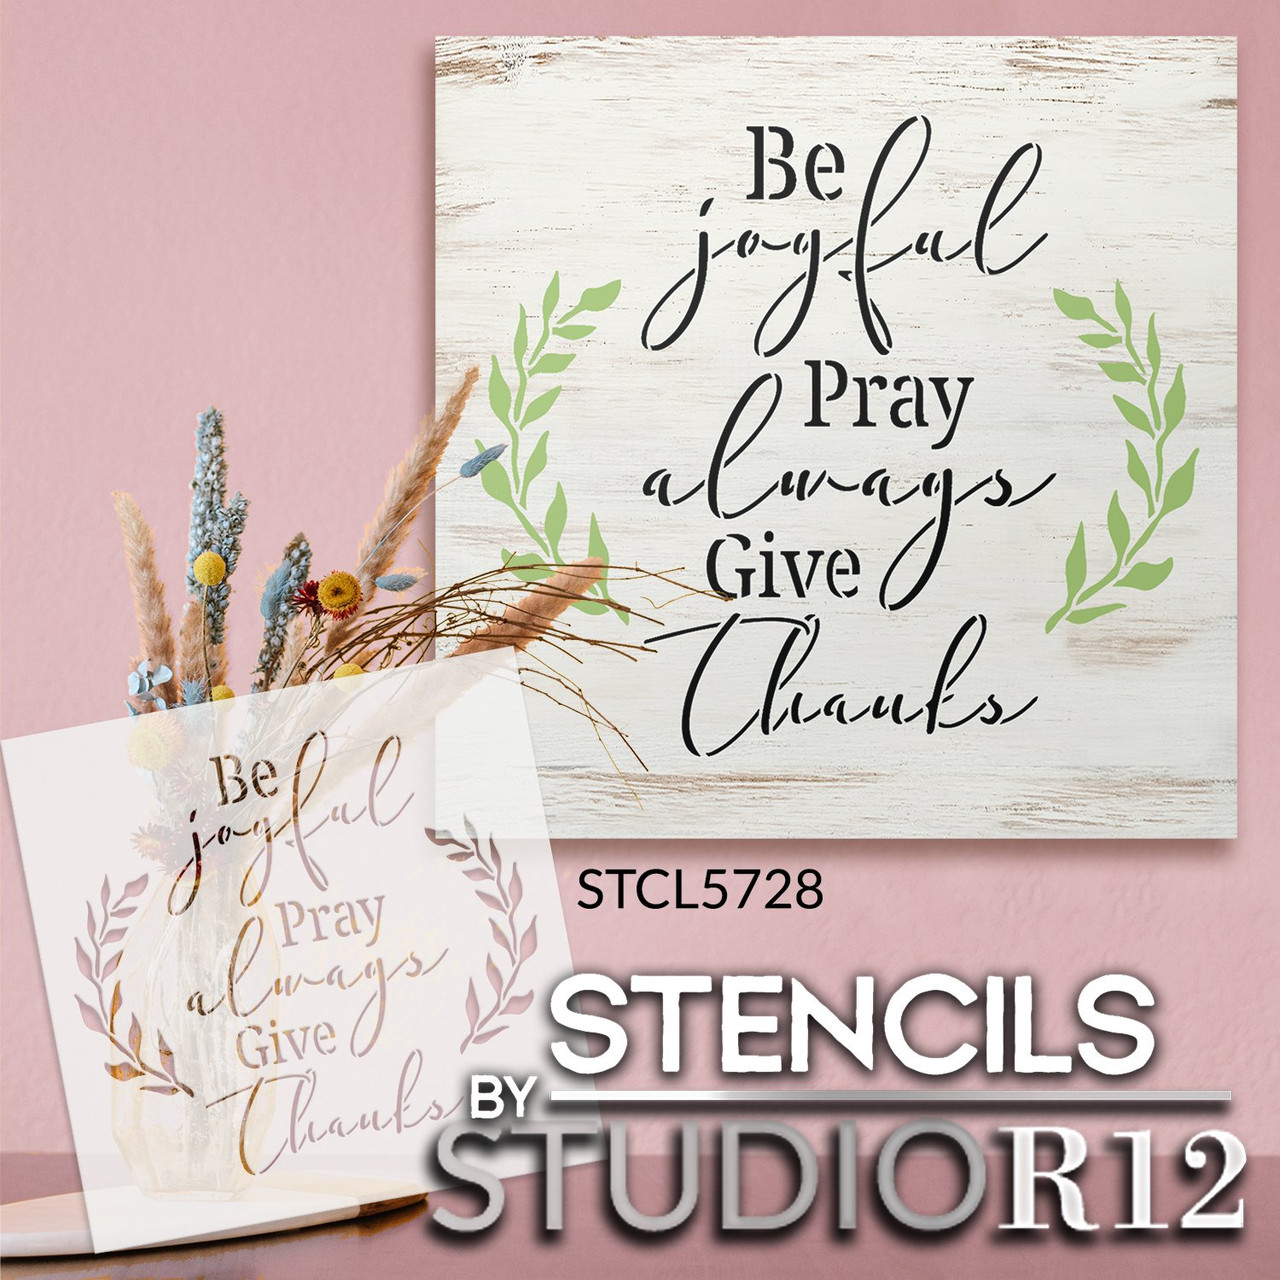 Be Joyful Pray Always Give Thanks Stencil by StudioR12 | Craft DIY Inspirational Home Decor | Paint Wood Sign | Reusable Mylar Template | Select Size